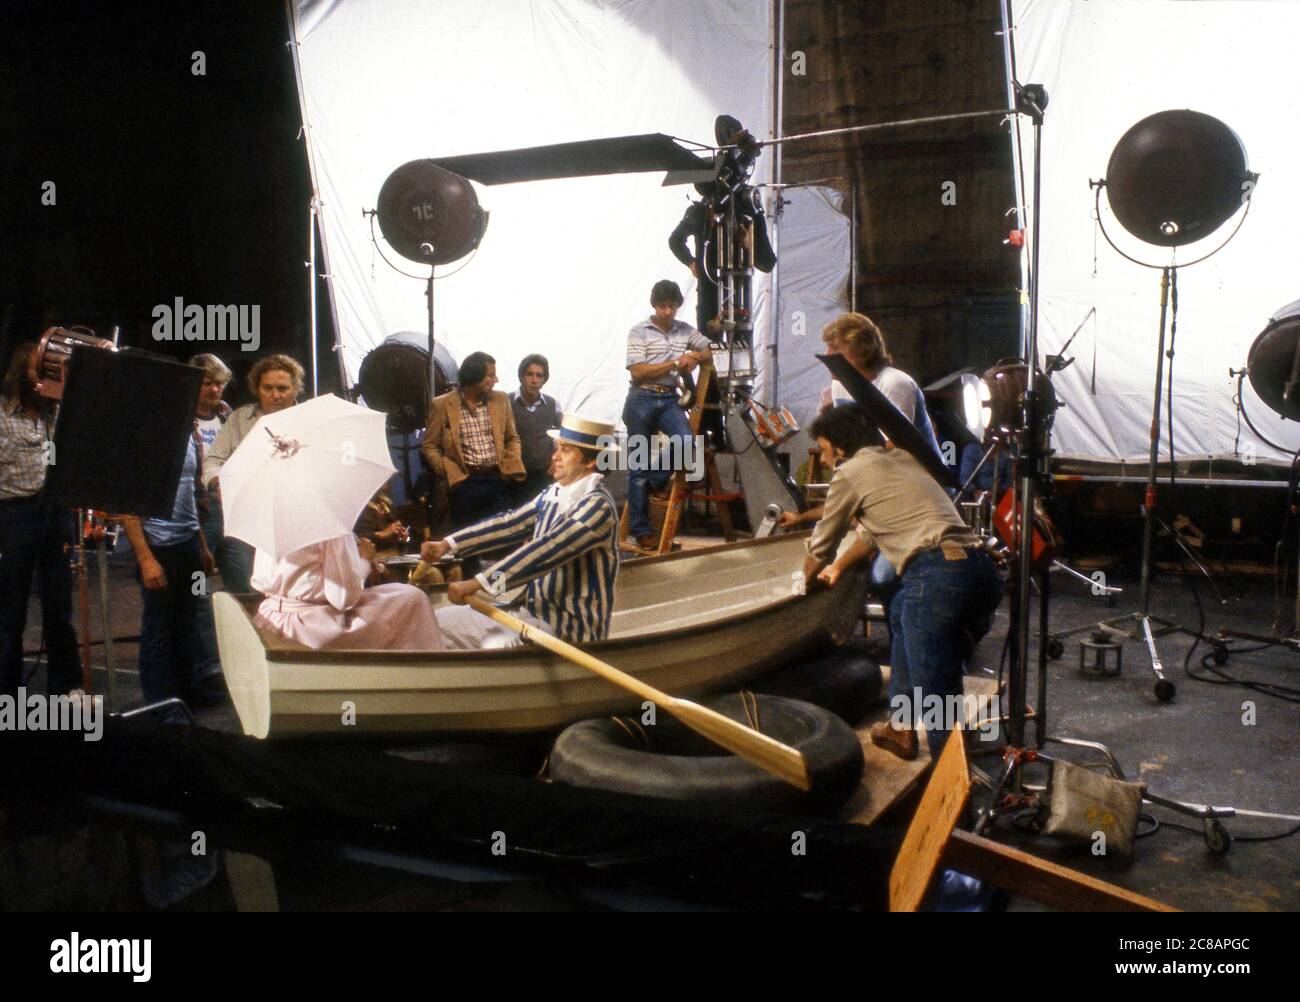 Commercial film production inside studio in Hollywood filming a scene to look like a couple rowing a boat  on a lake. Stock Photo